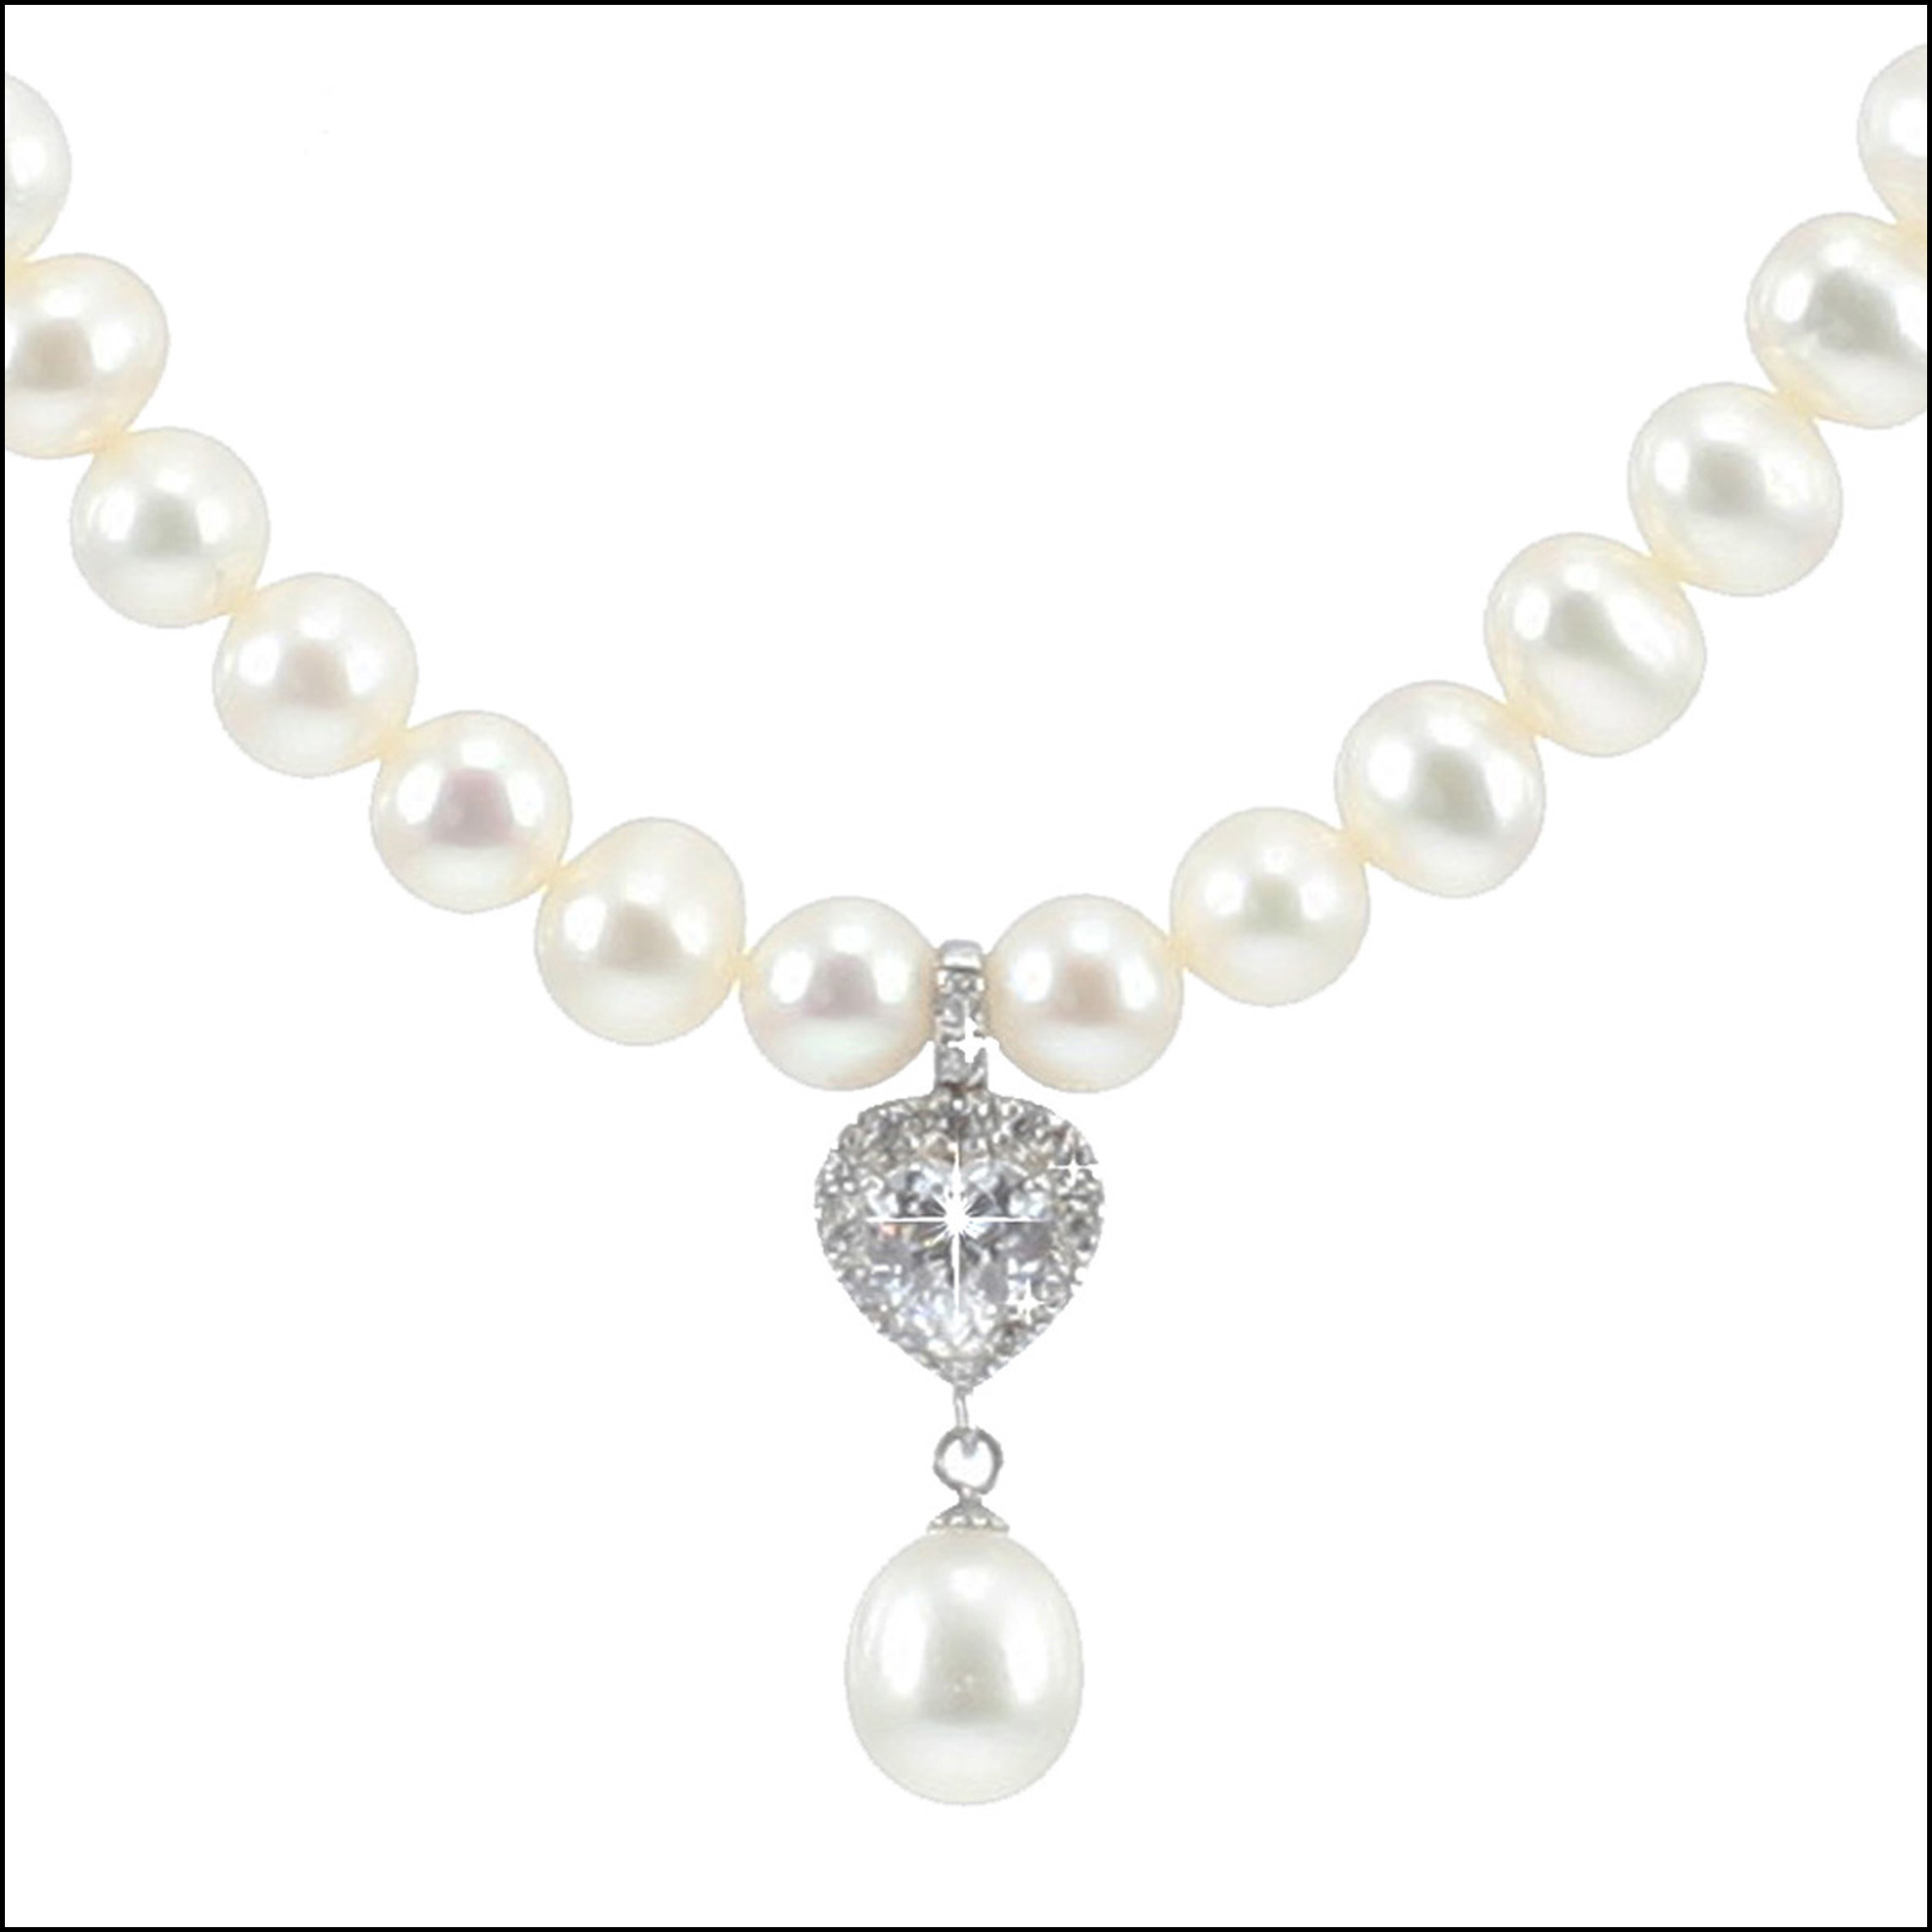 MF035 - Freshwater Pearls & Cubic Zirconia Heart Necklace - Lido Collection